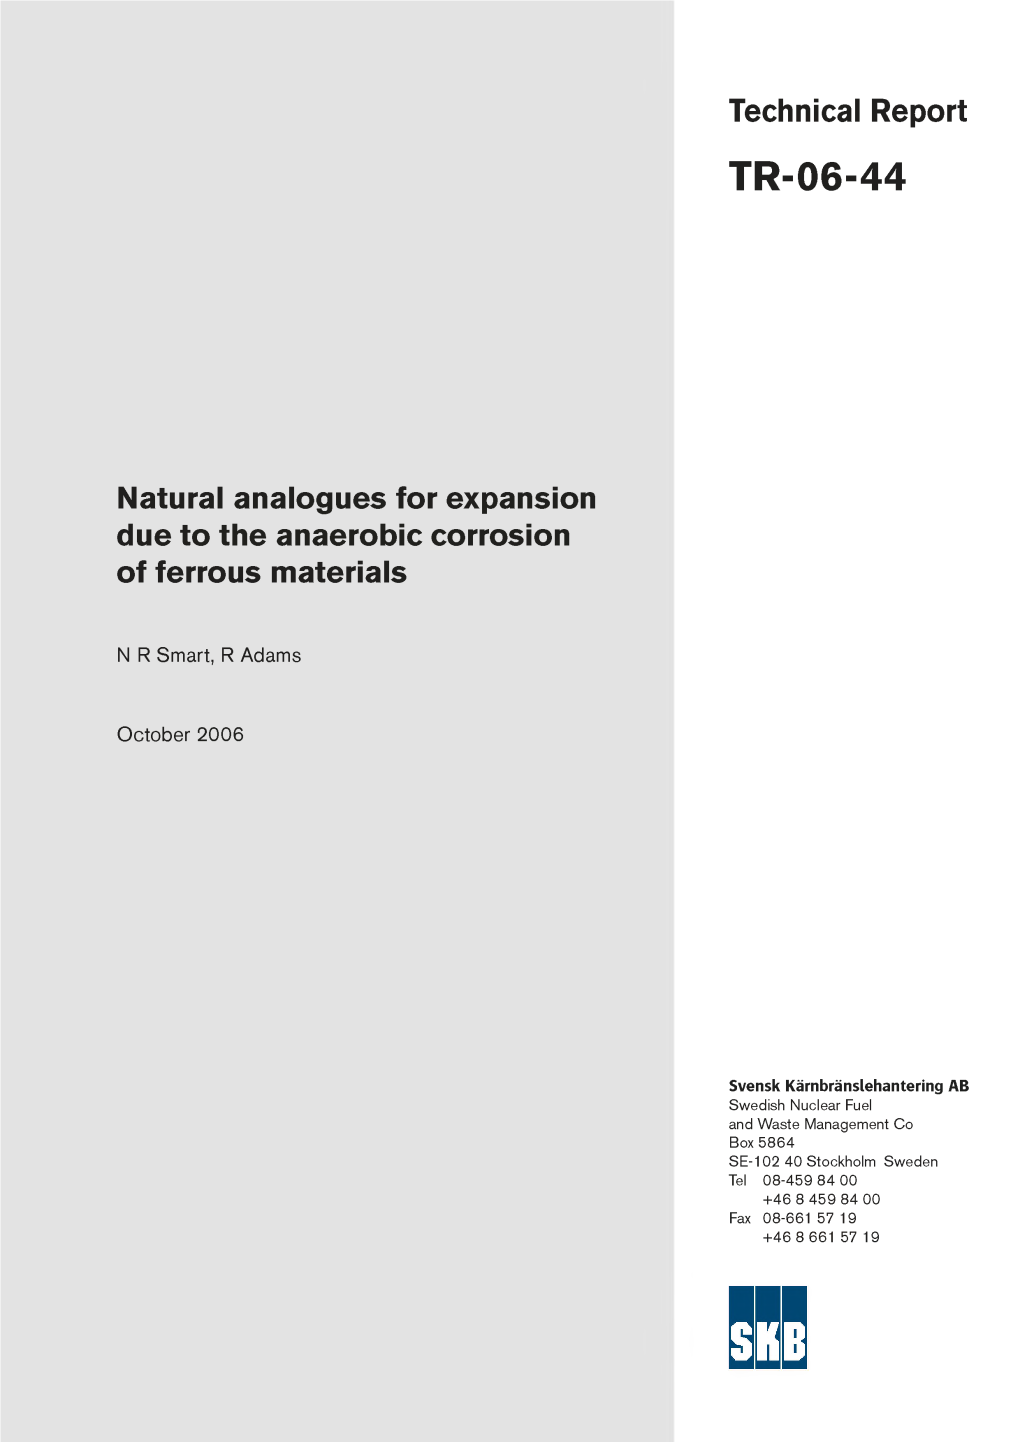 Natural Analogues for Expansion Due to the Anaerobic Corrosion of Ferrous Materials